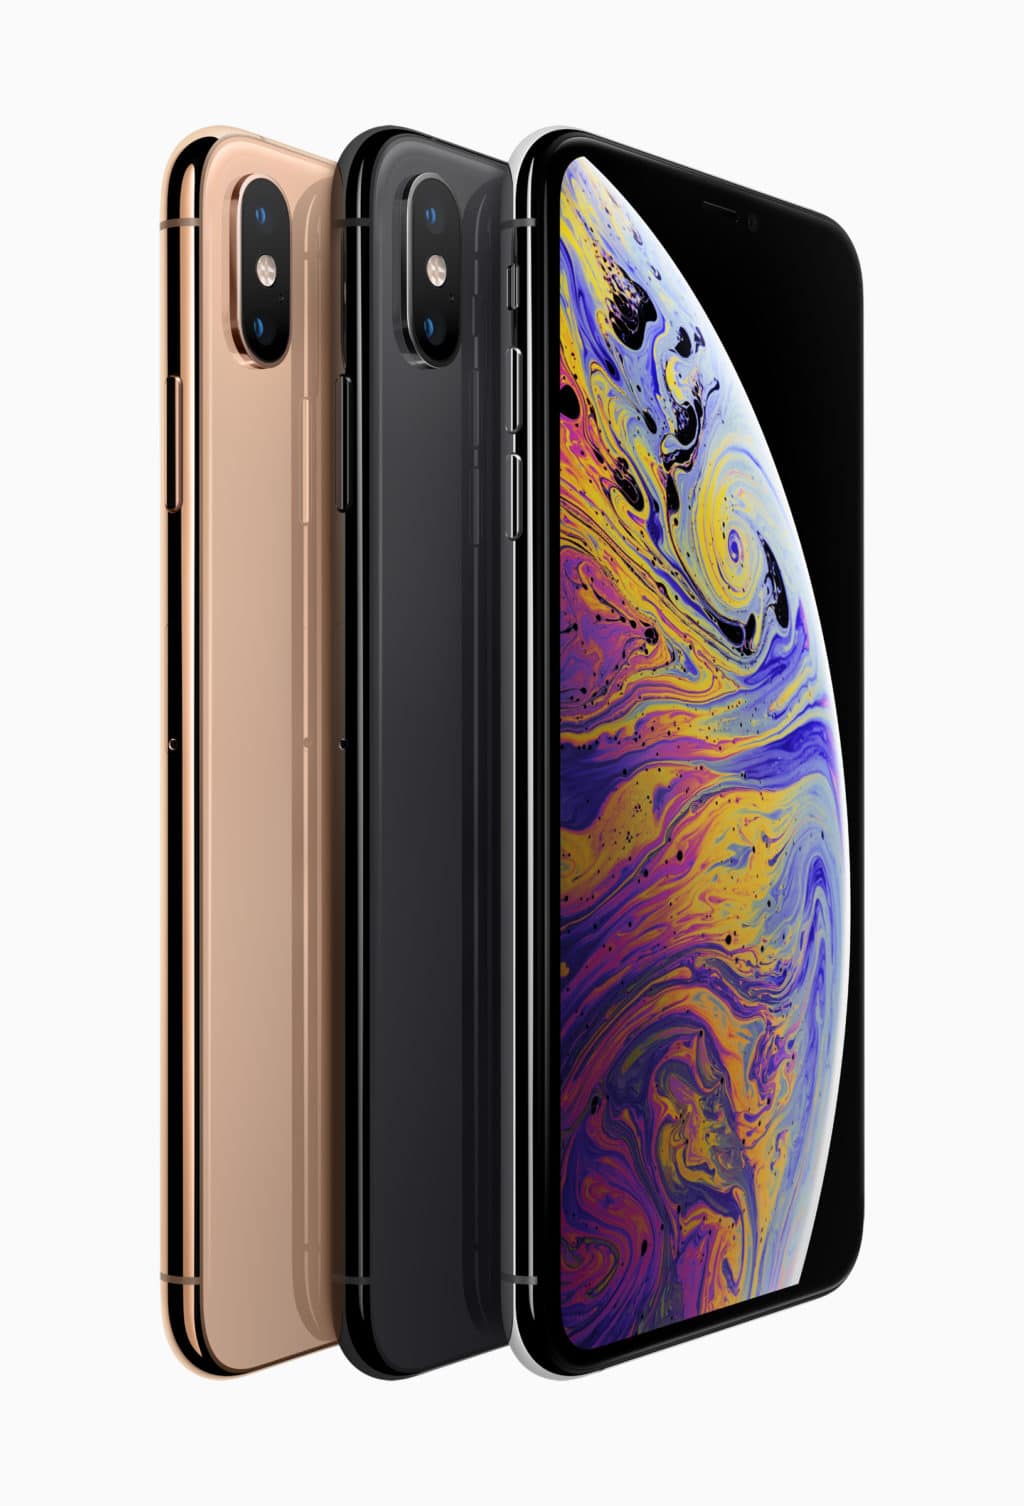 iPhone XS vs iPhone XR: What's the Difference